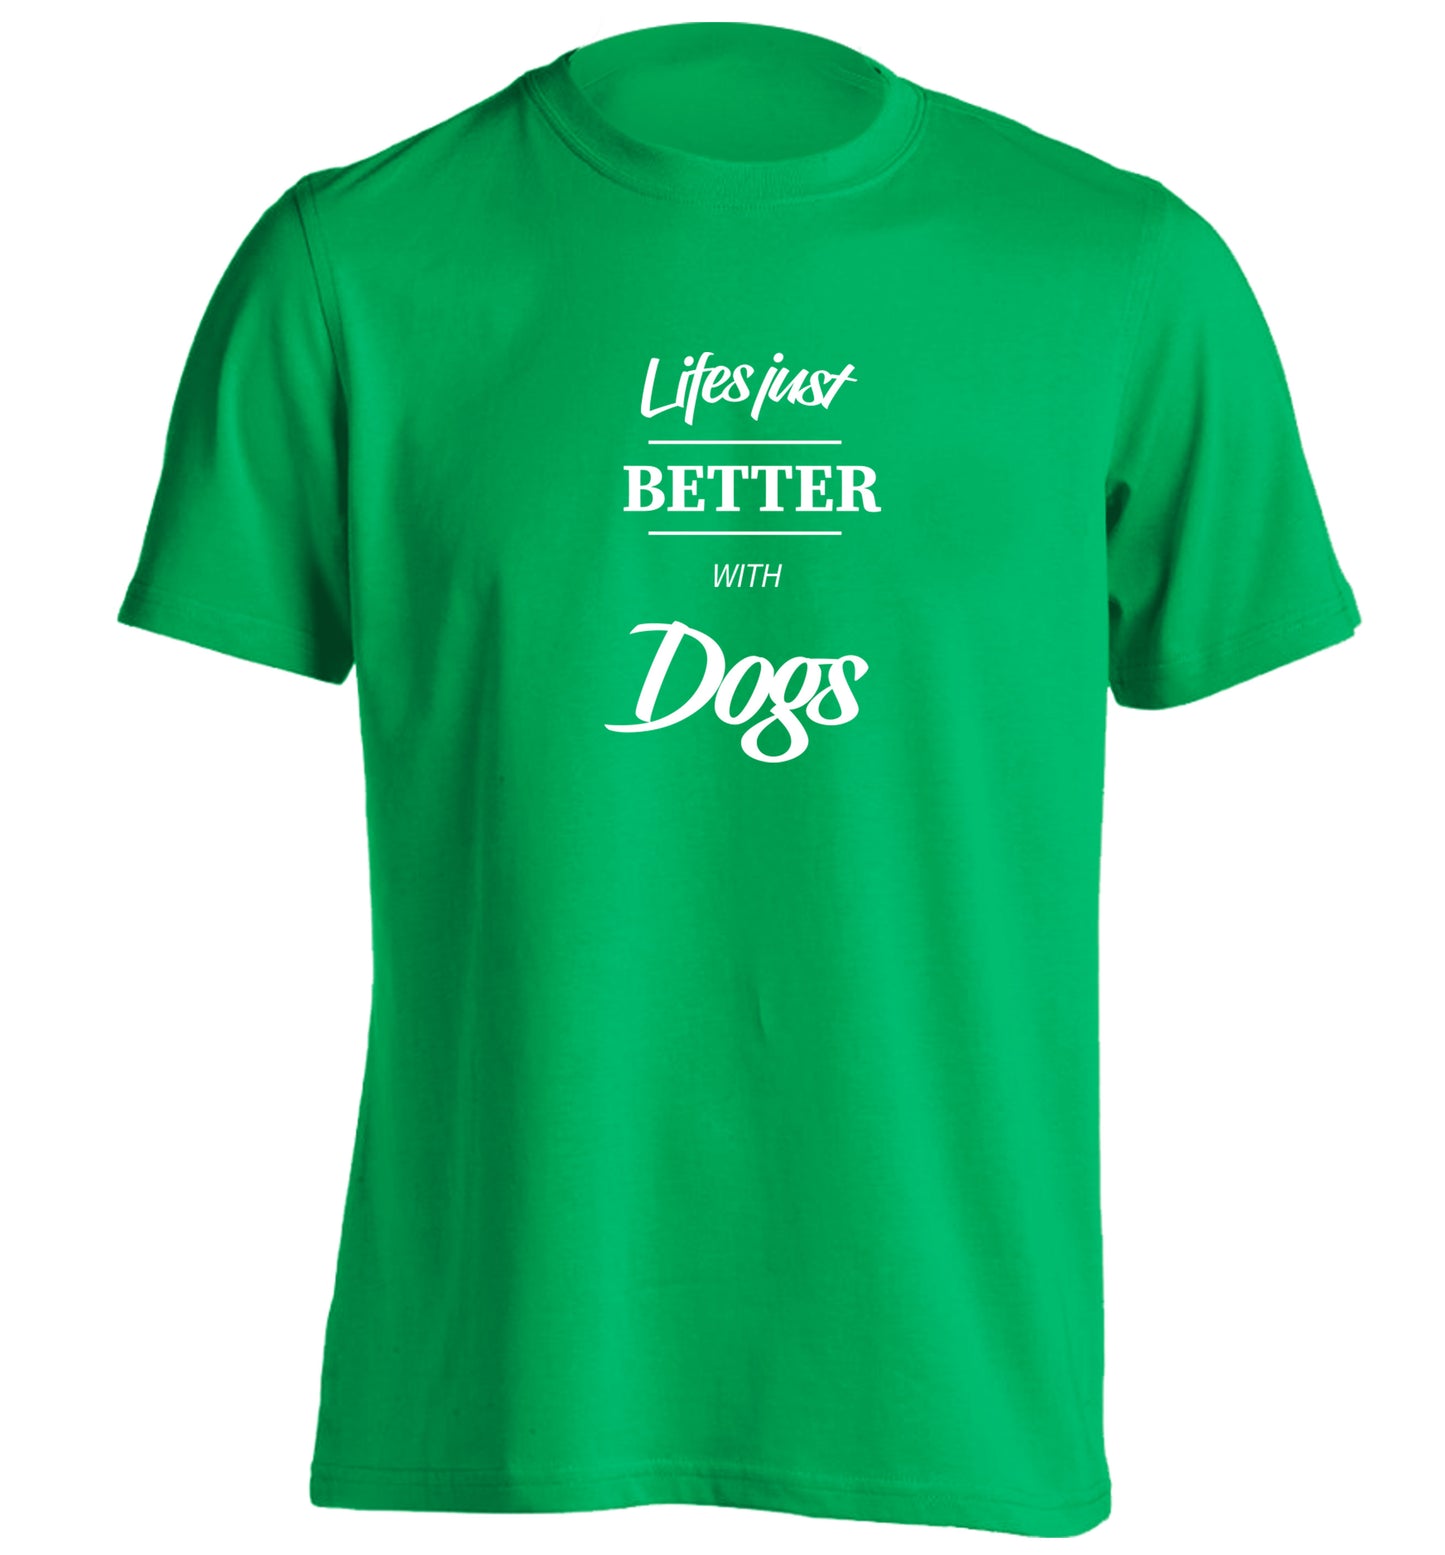 life is better with dogs adults unisex green Tshirt 2XL